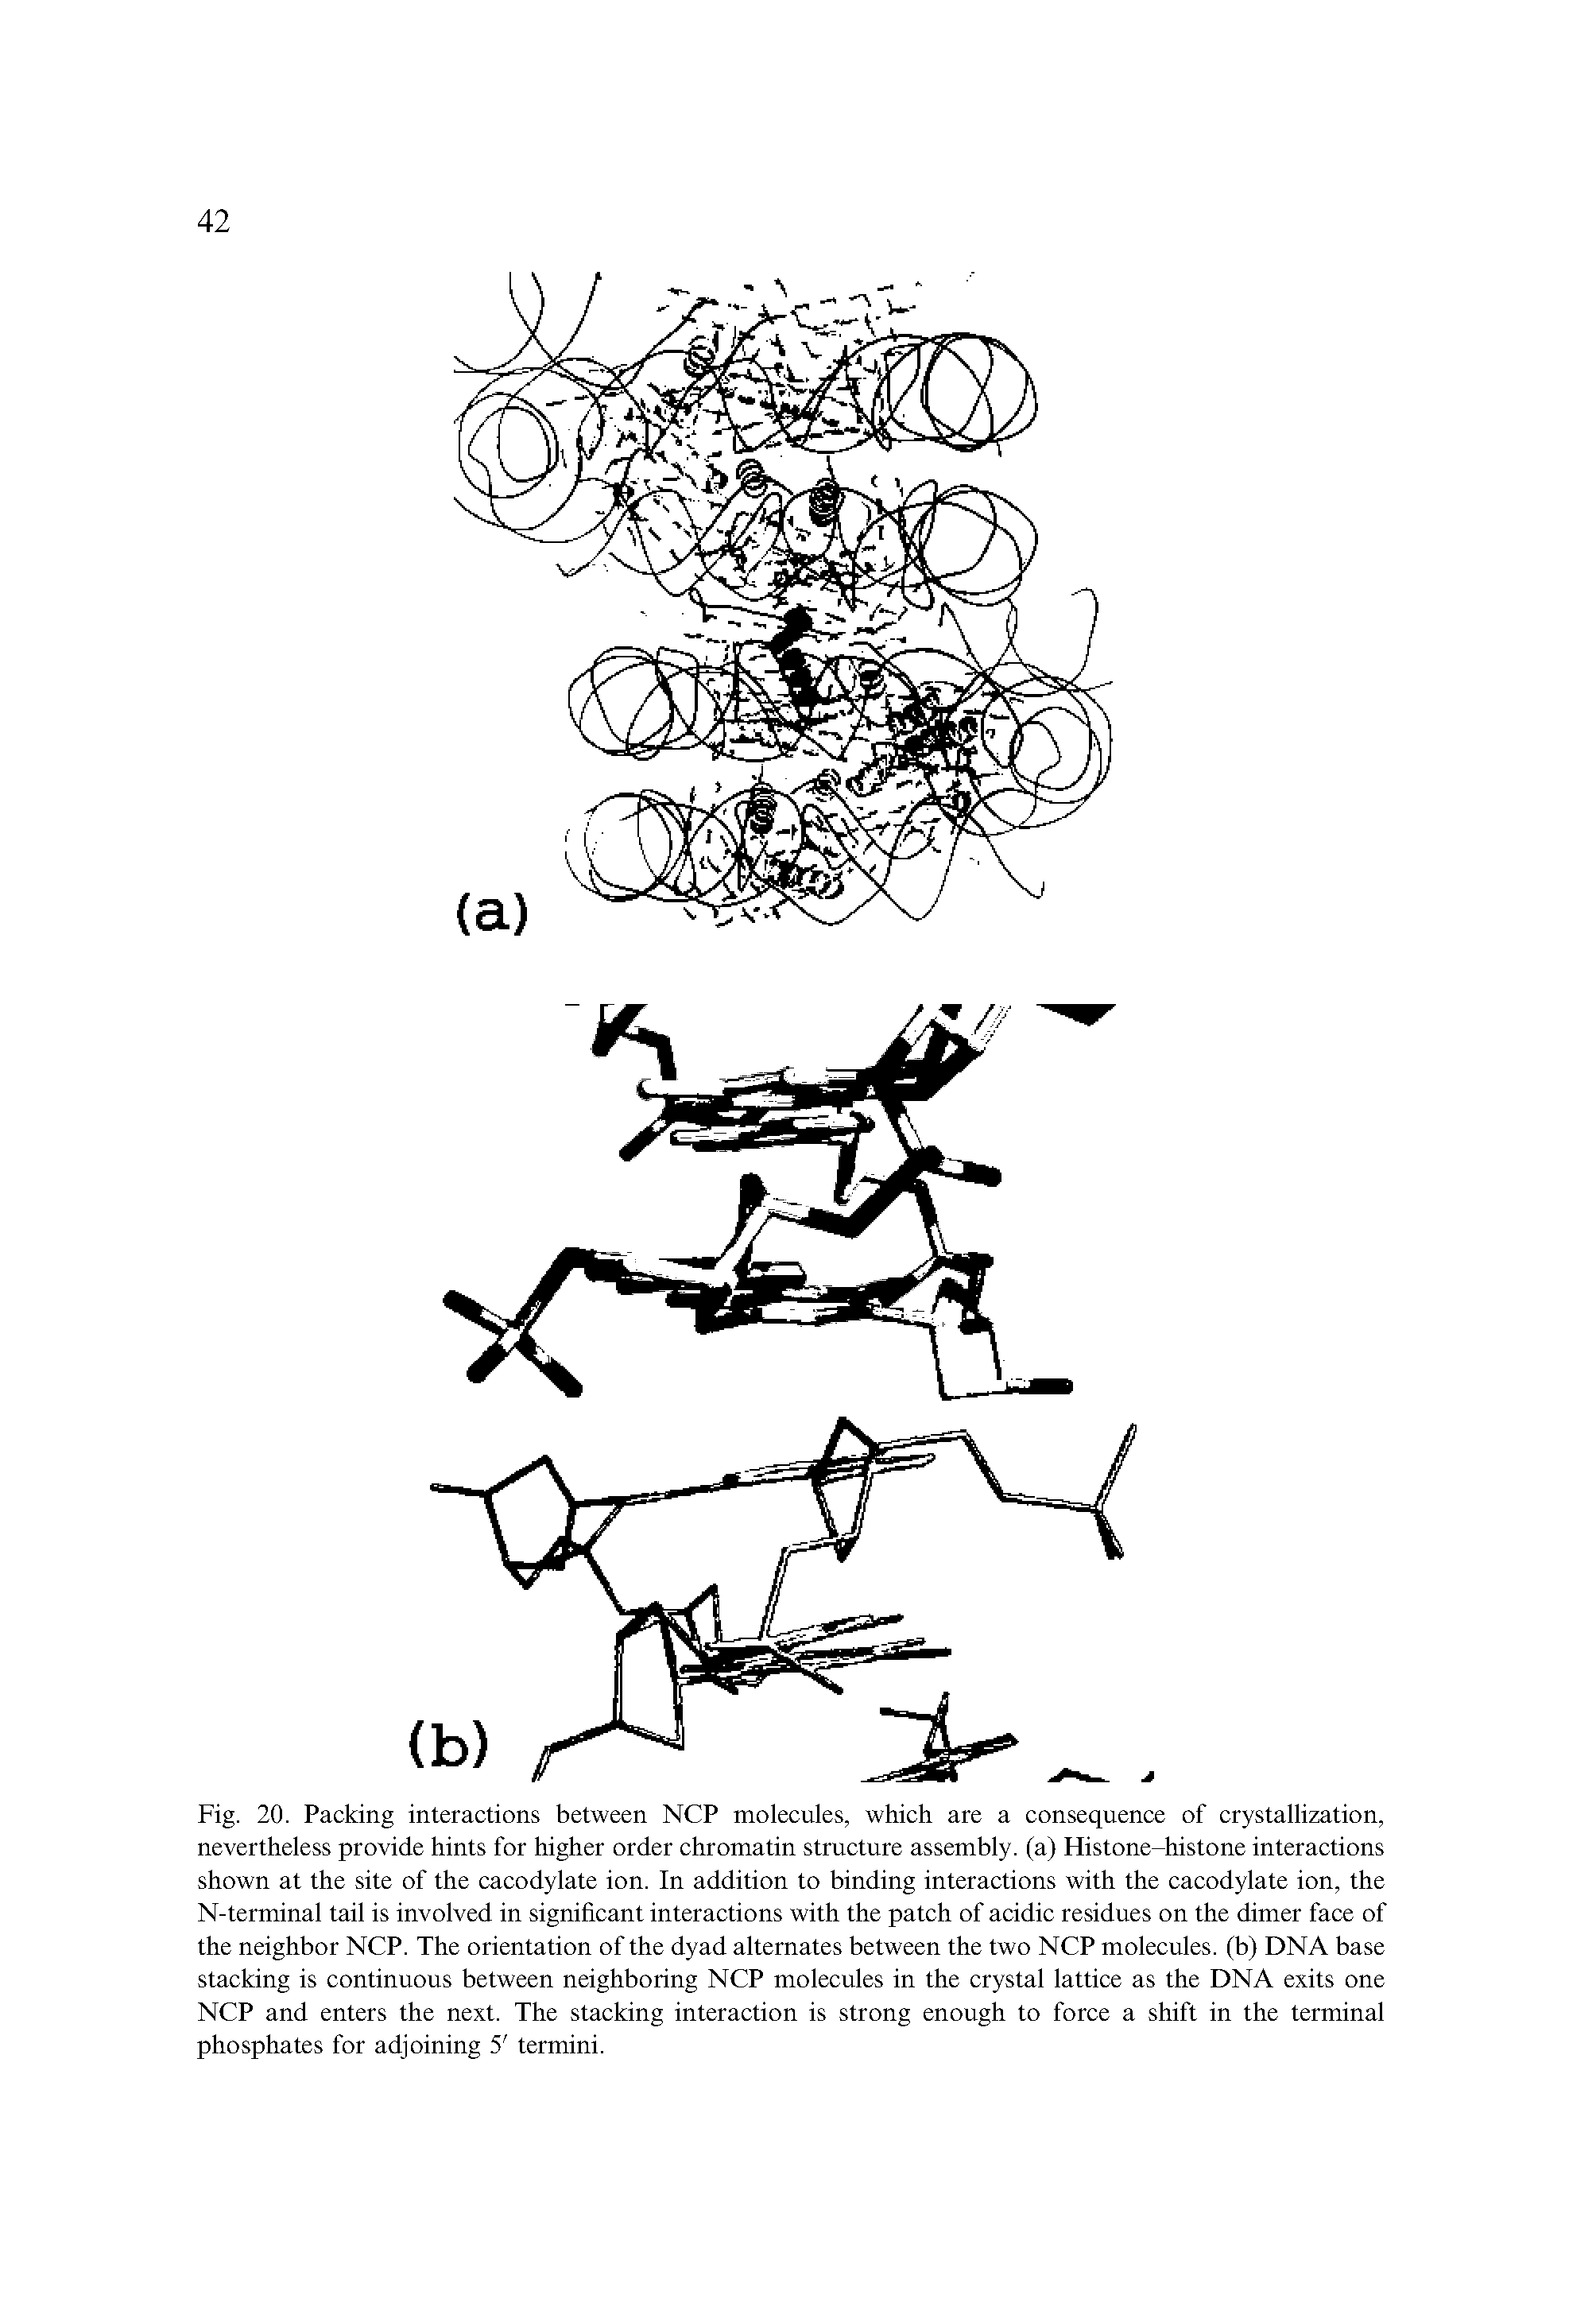 Fig. 20. Packing interactions between NCP molecules, which are a consequence of crystallization, nevertheless provide hints for higher order chromatin structure assembly, (a) Histone-histone interactions shown at the site of the cacodylate ion. In addition to binding interactions with the cacodylate ion, the N-terminal tail is involved in significant interactions with the patch of acidic residues on the dimer face of the neighbor NCP. The orientation of the dyad alternates between the two NCP molecules, (b) DNA base stacking is continuous between neighboring NCP molecules in the crystal lattice as the DNA exits one NCP and enters the next. The stacking interaction is strong enough to force a shift in the terminal phosphates for adjoining 5 termini.